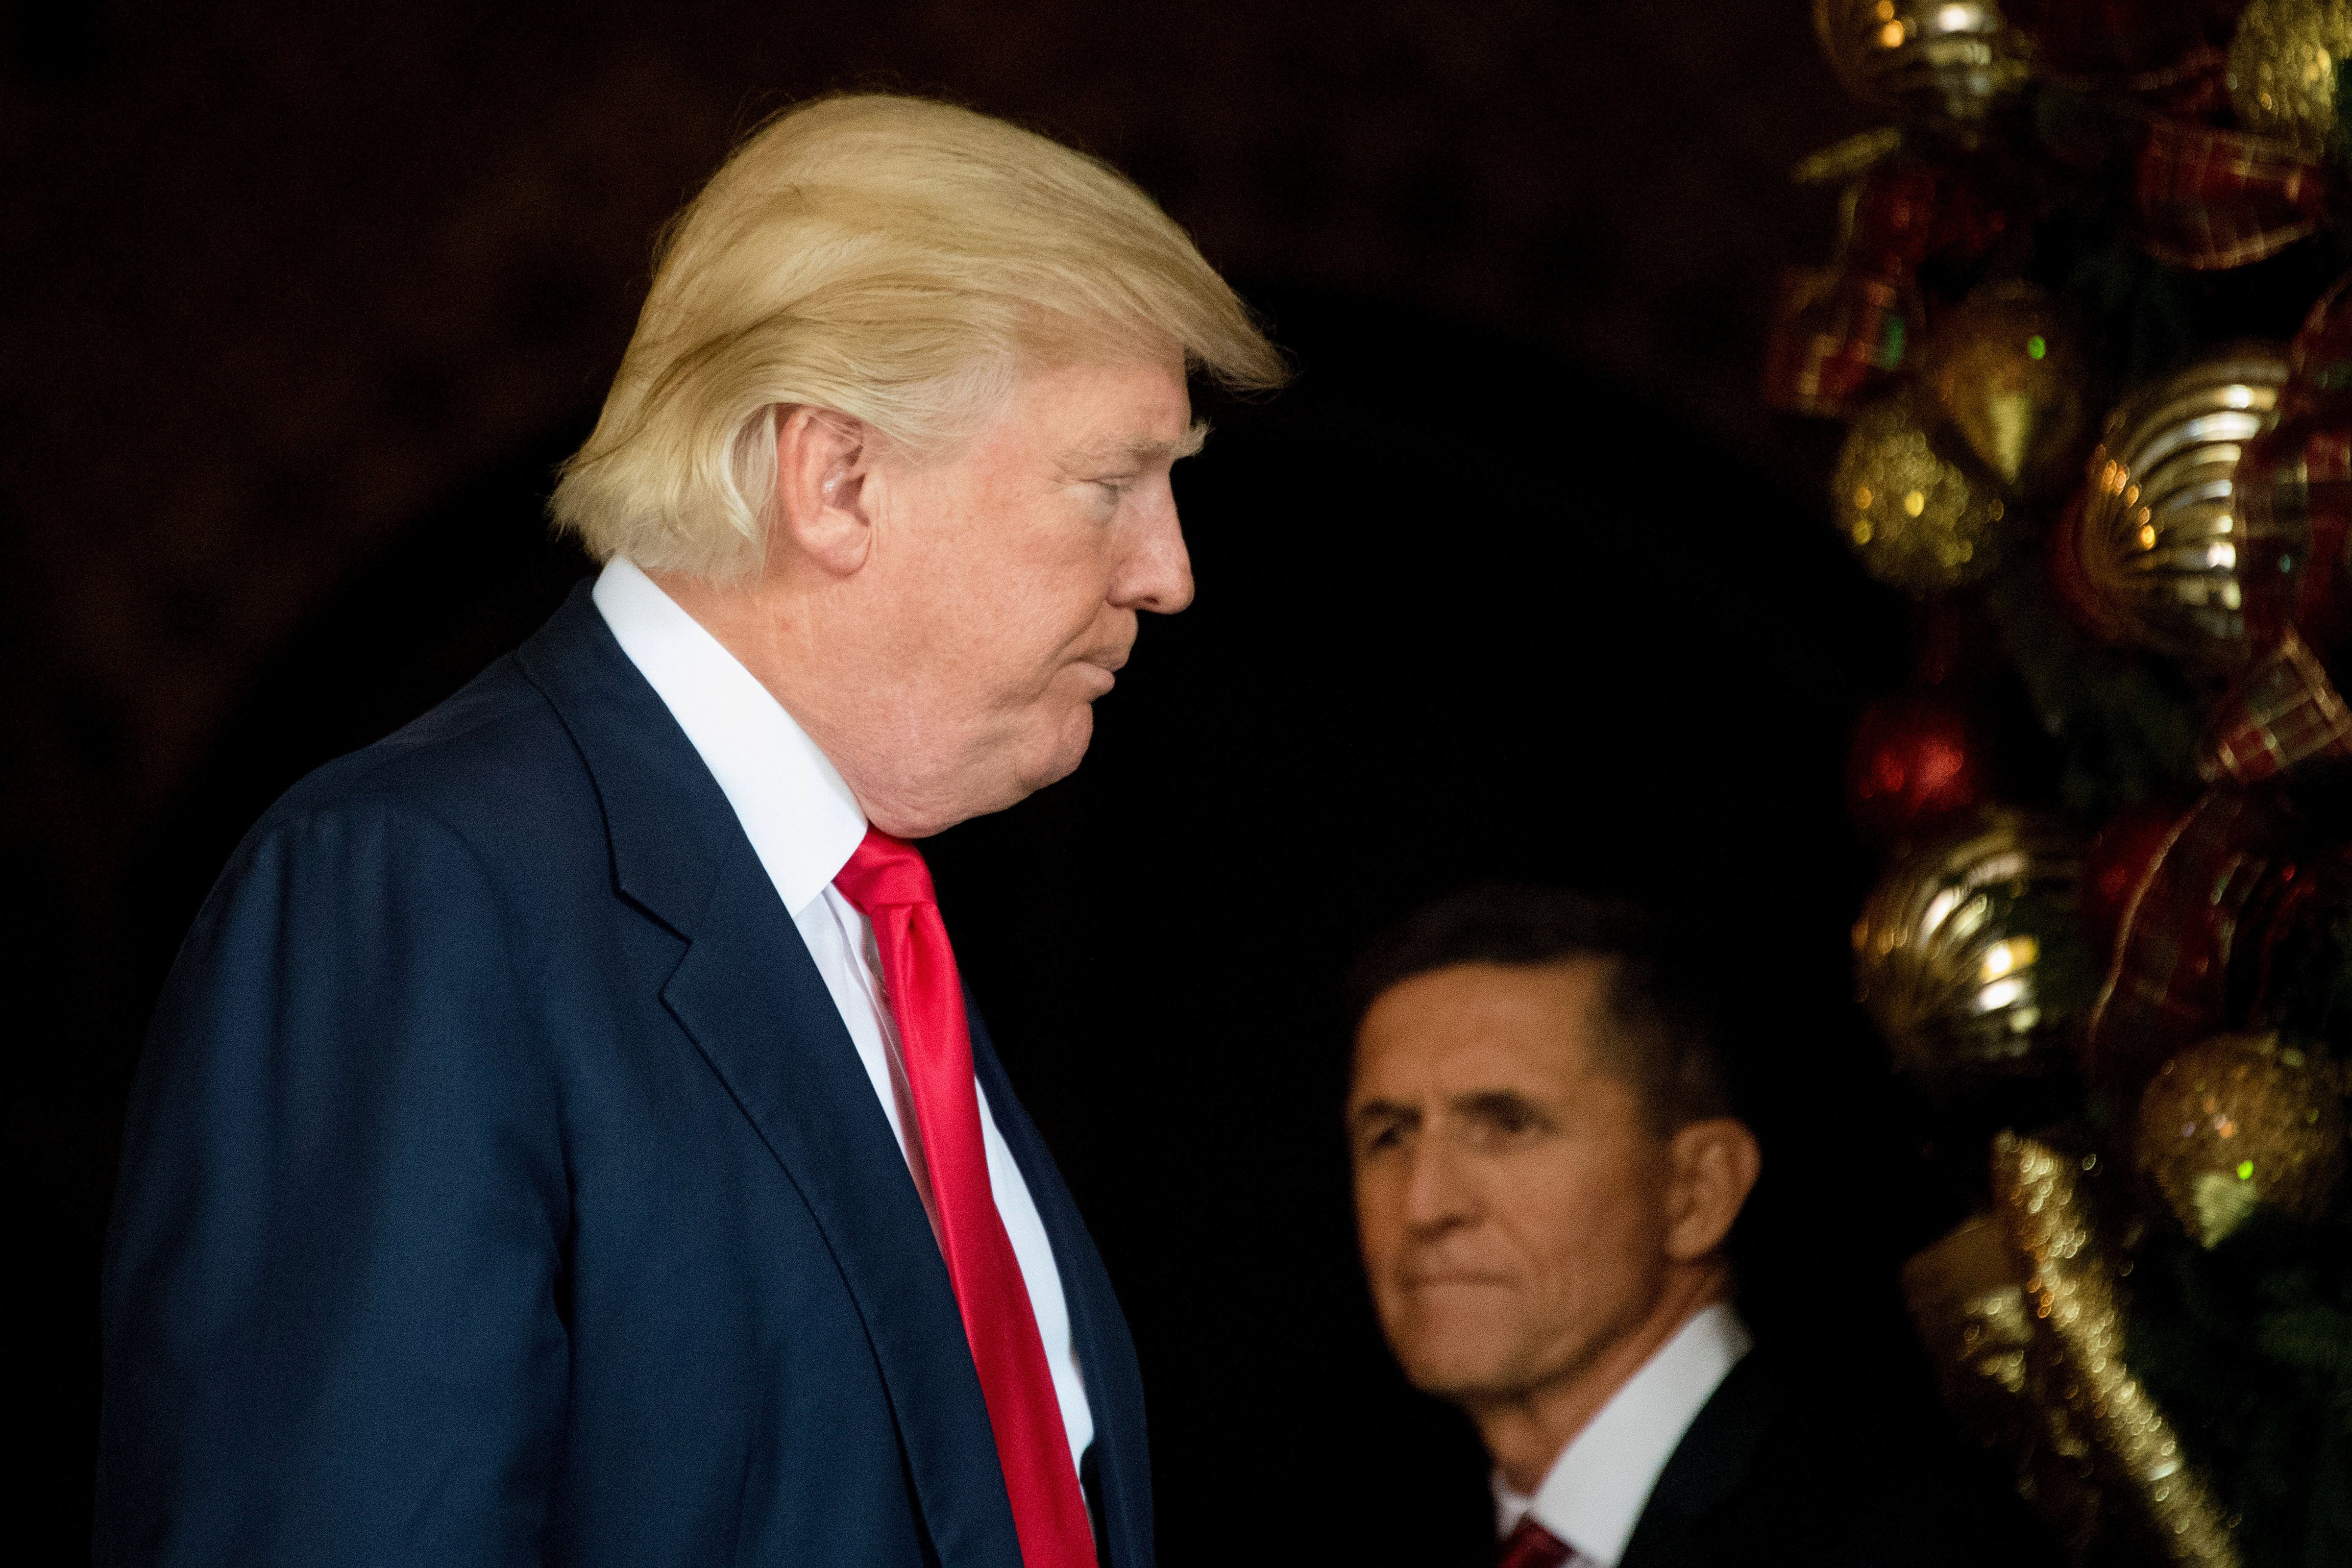 Donald Trump (L) stands with Trump National Security Adviser Lt. General Michael Flynn (R) at Mar-a-Lago in Palm Beach, Florida, on Dec. 21, 2016. (JIM WATSON&mdash;AFP/Getty Images)